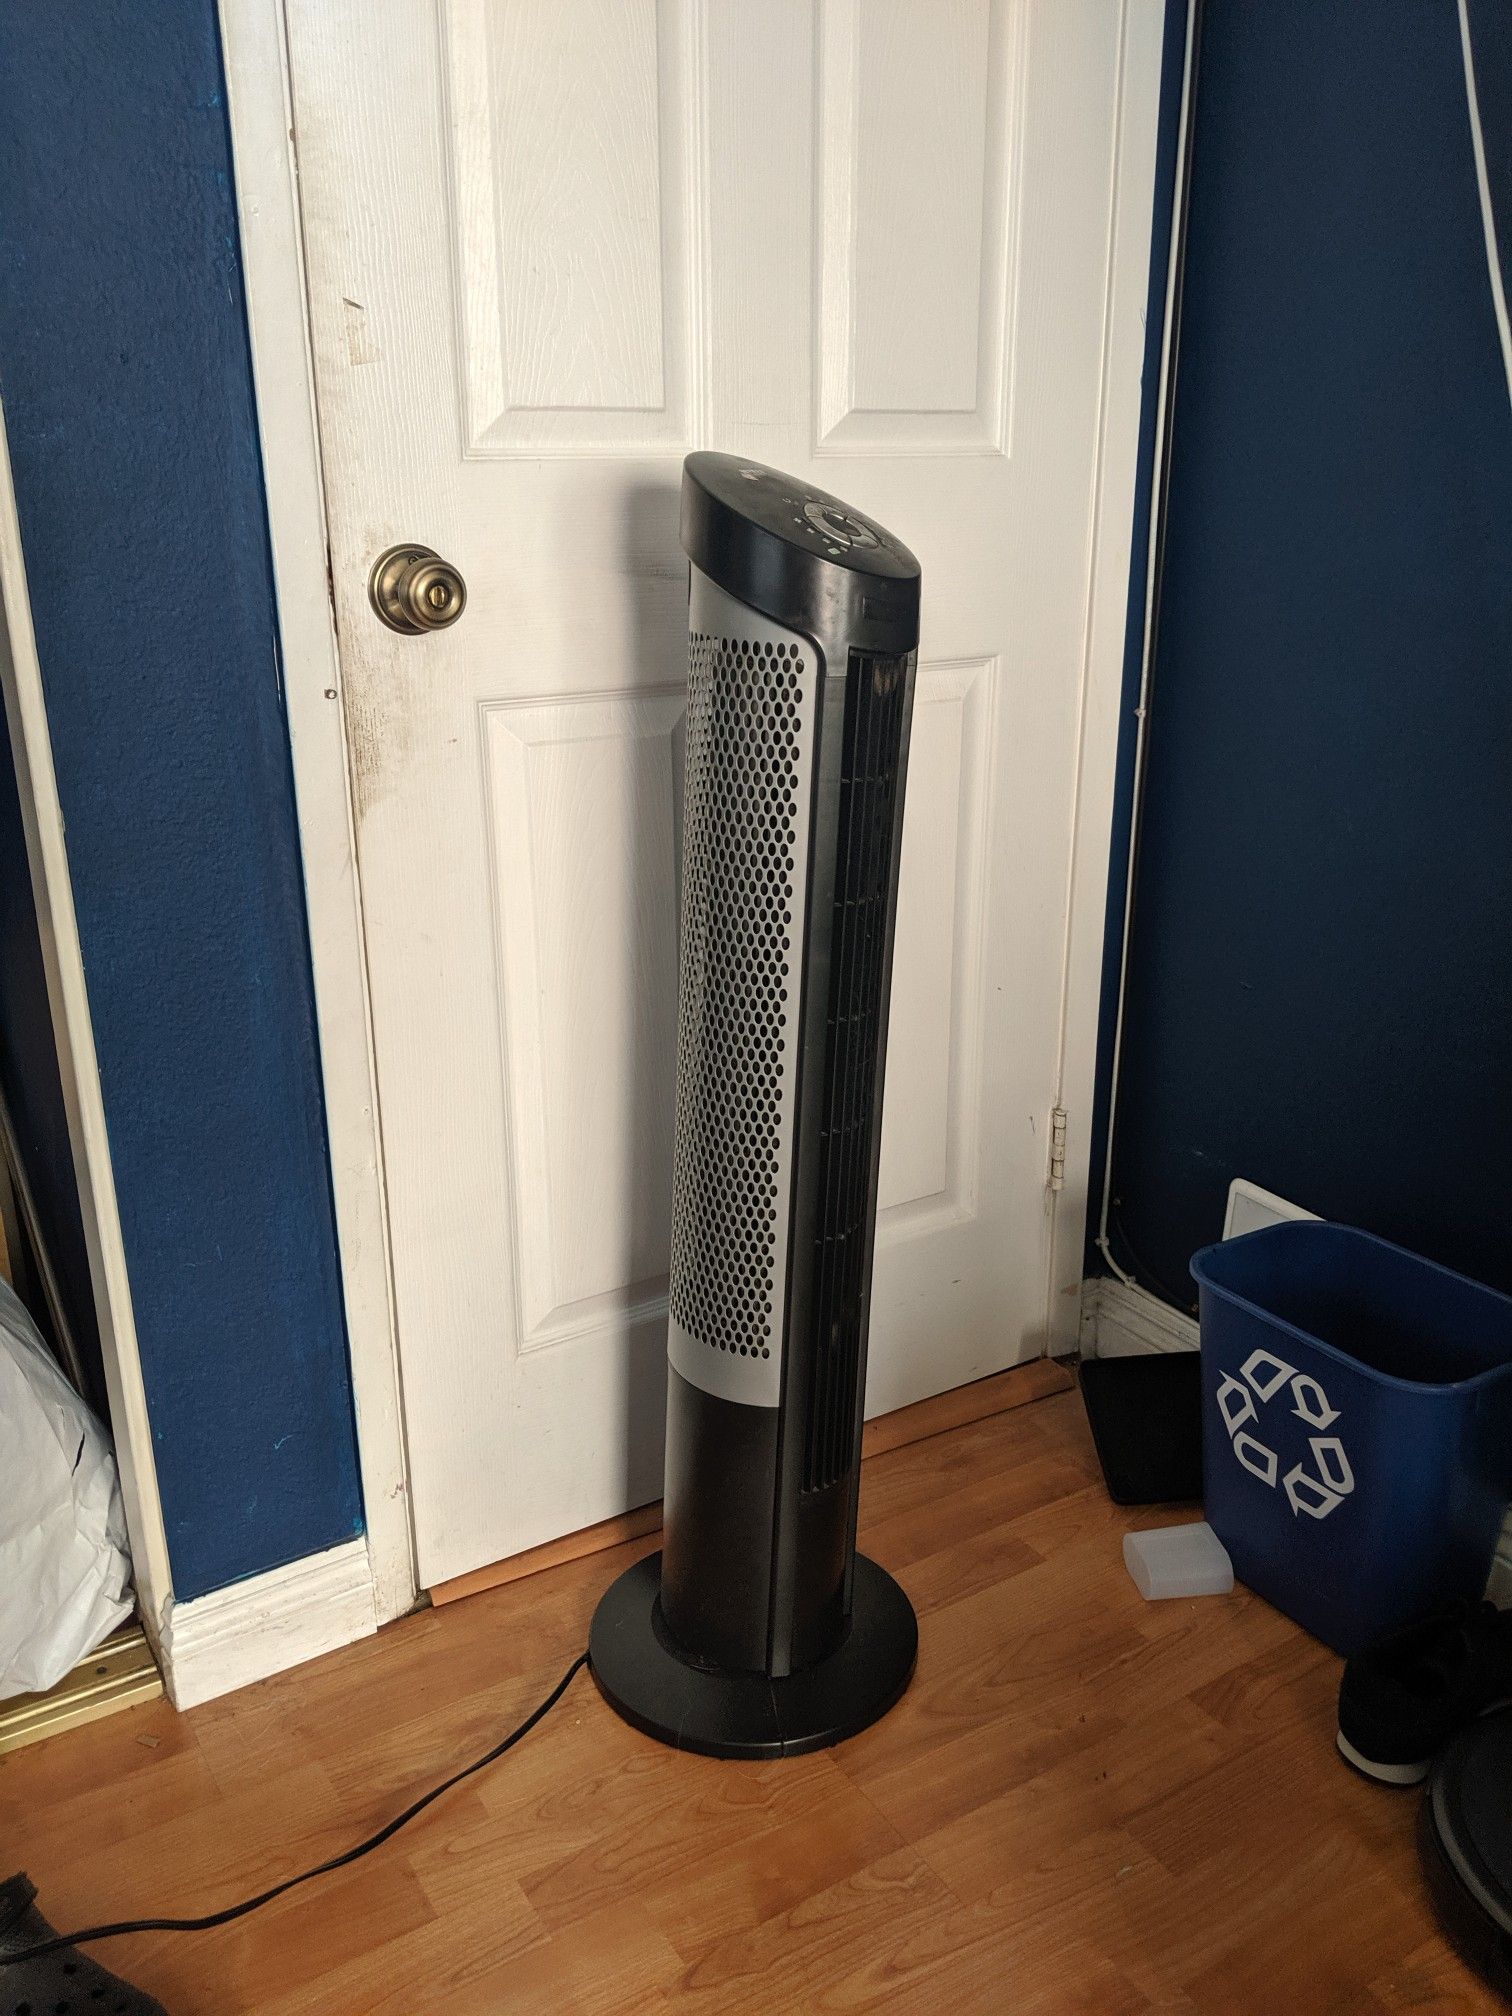 Tower fan kinda works, could be fixed maybe